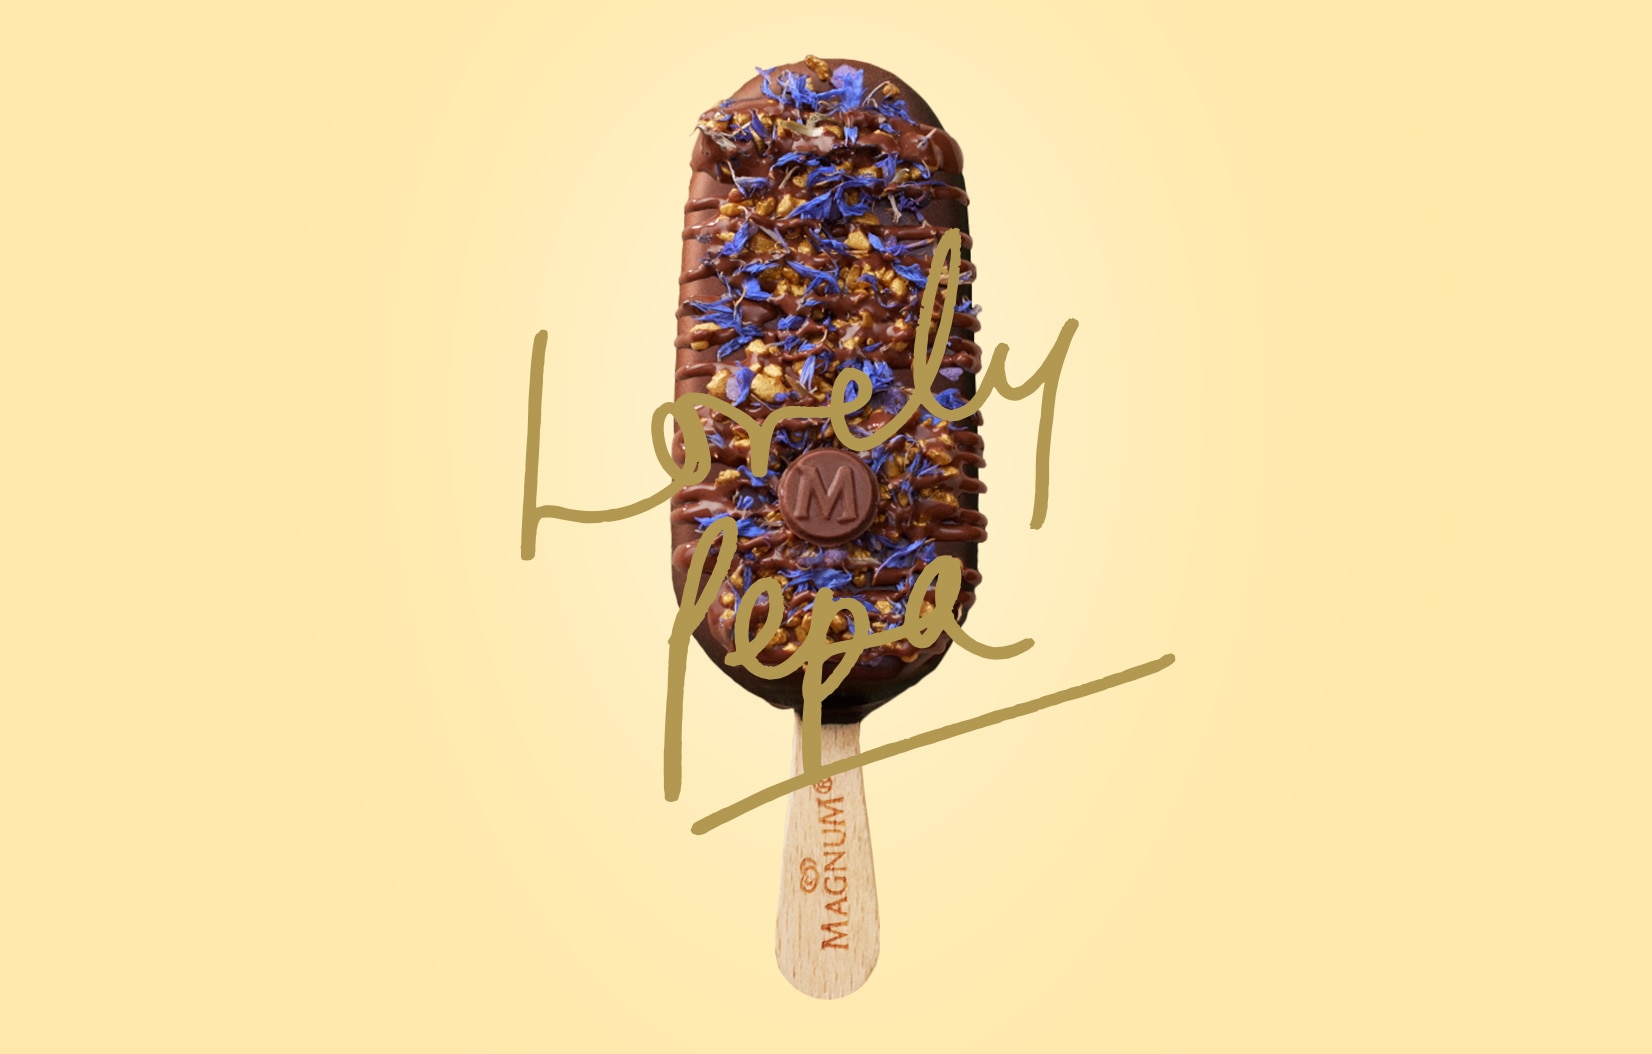 Pepa's Dream Magnum Ice cream covered with chocolate and colorful candies 